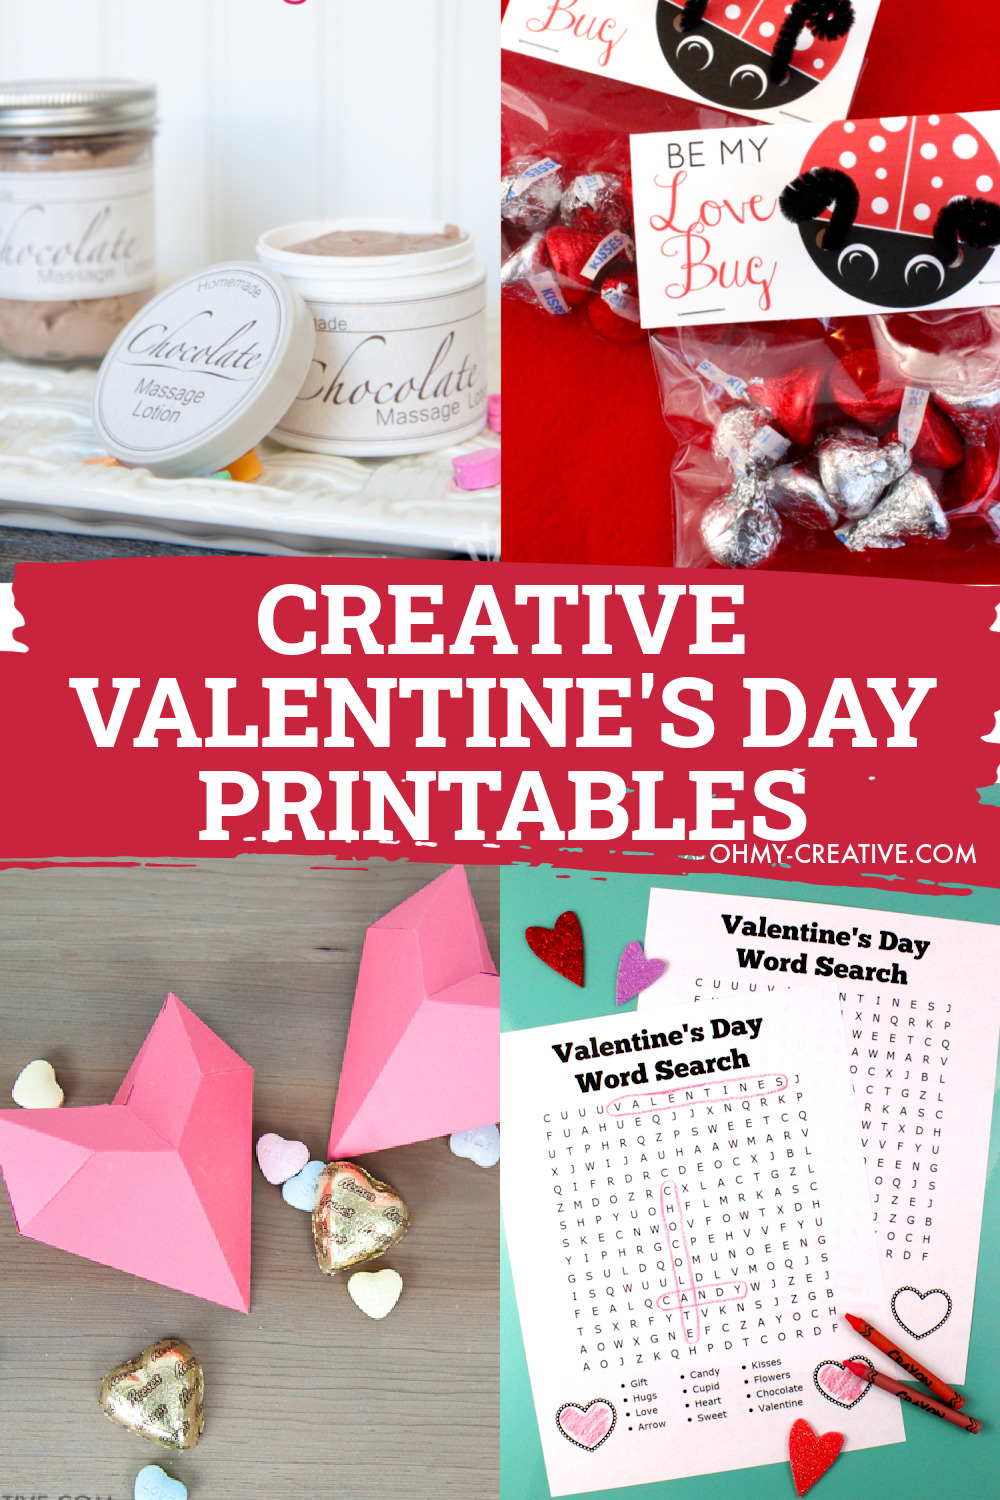 Valentine's printables include a Valentine's Day word search, 3D heart box and Valentine's Day treat bag topper printables.